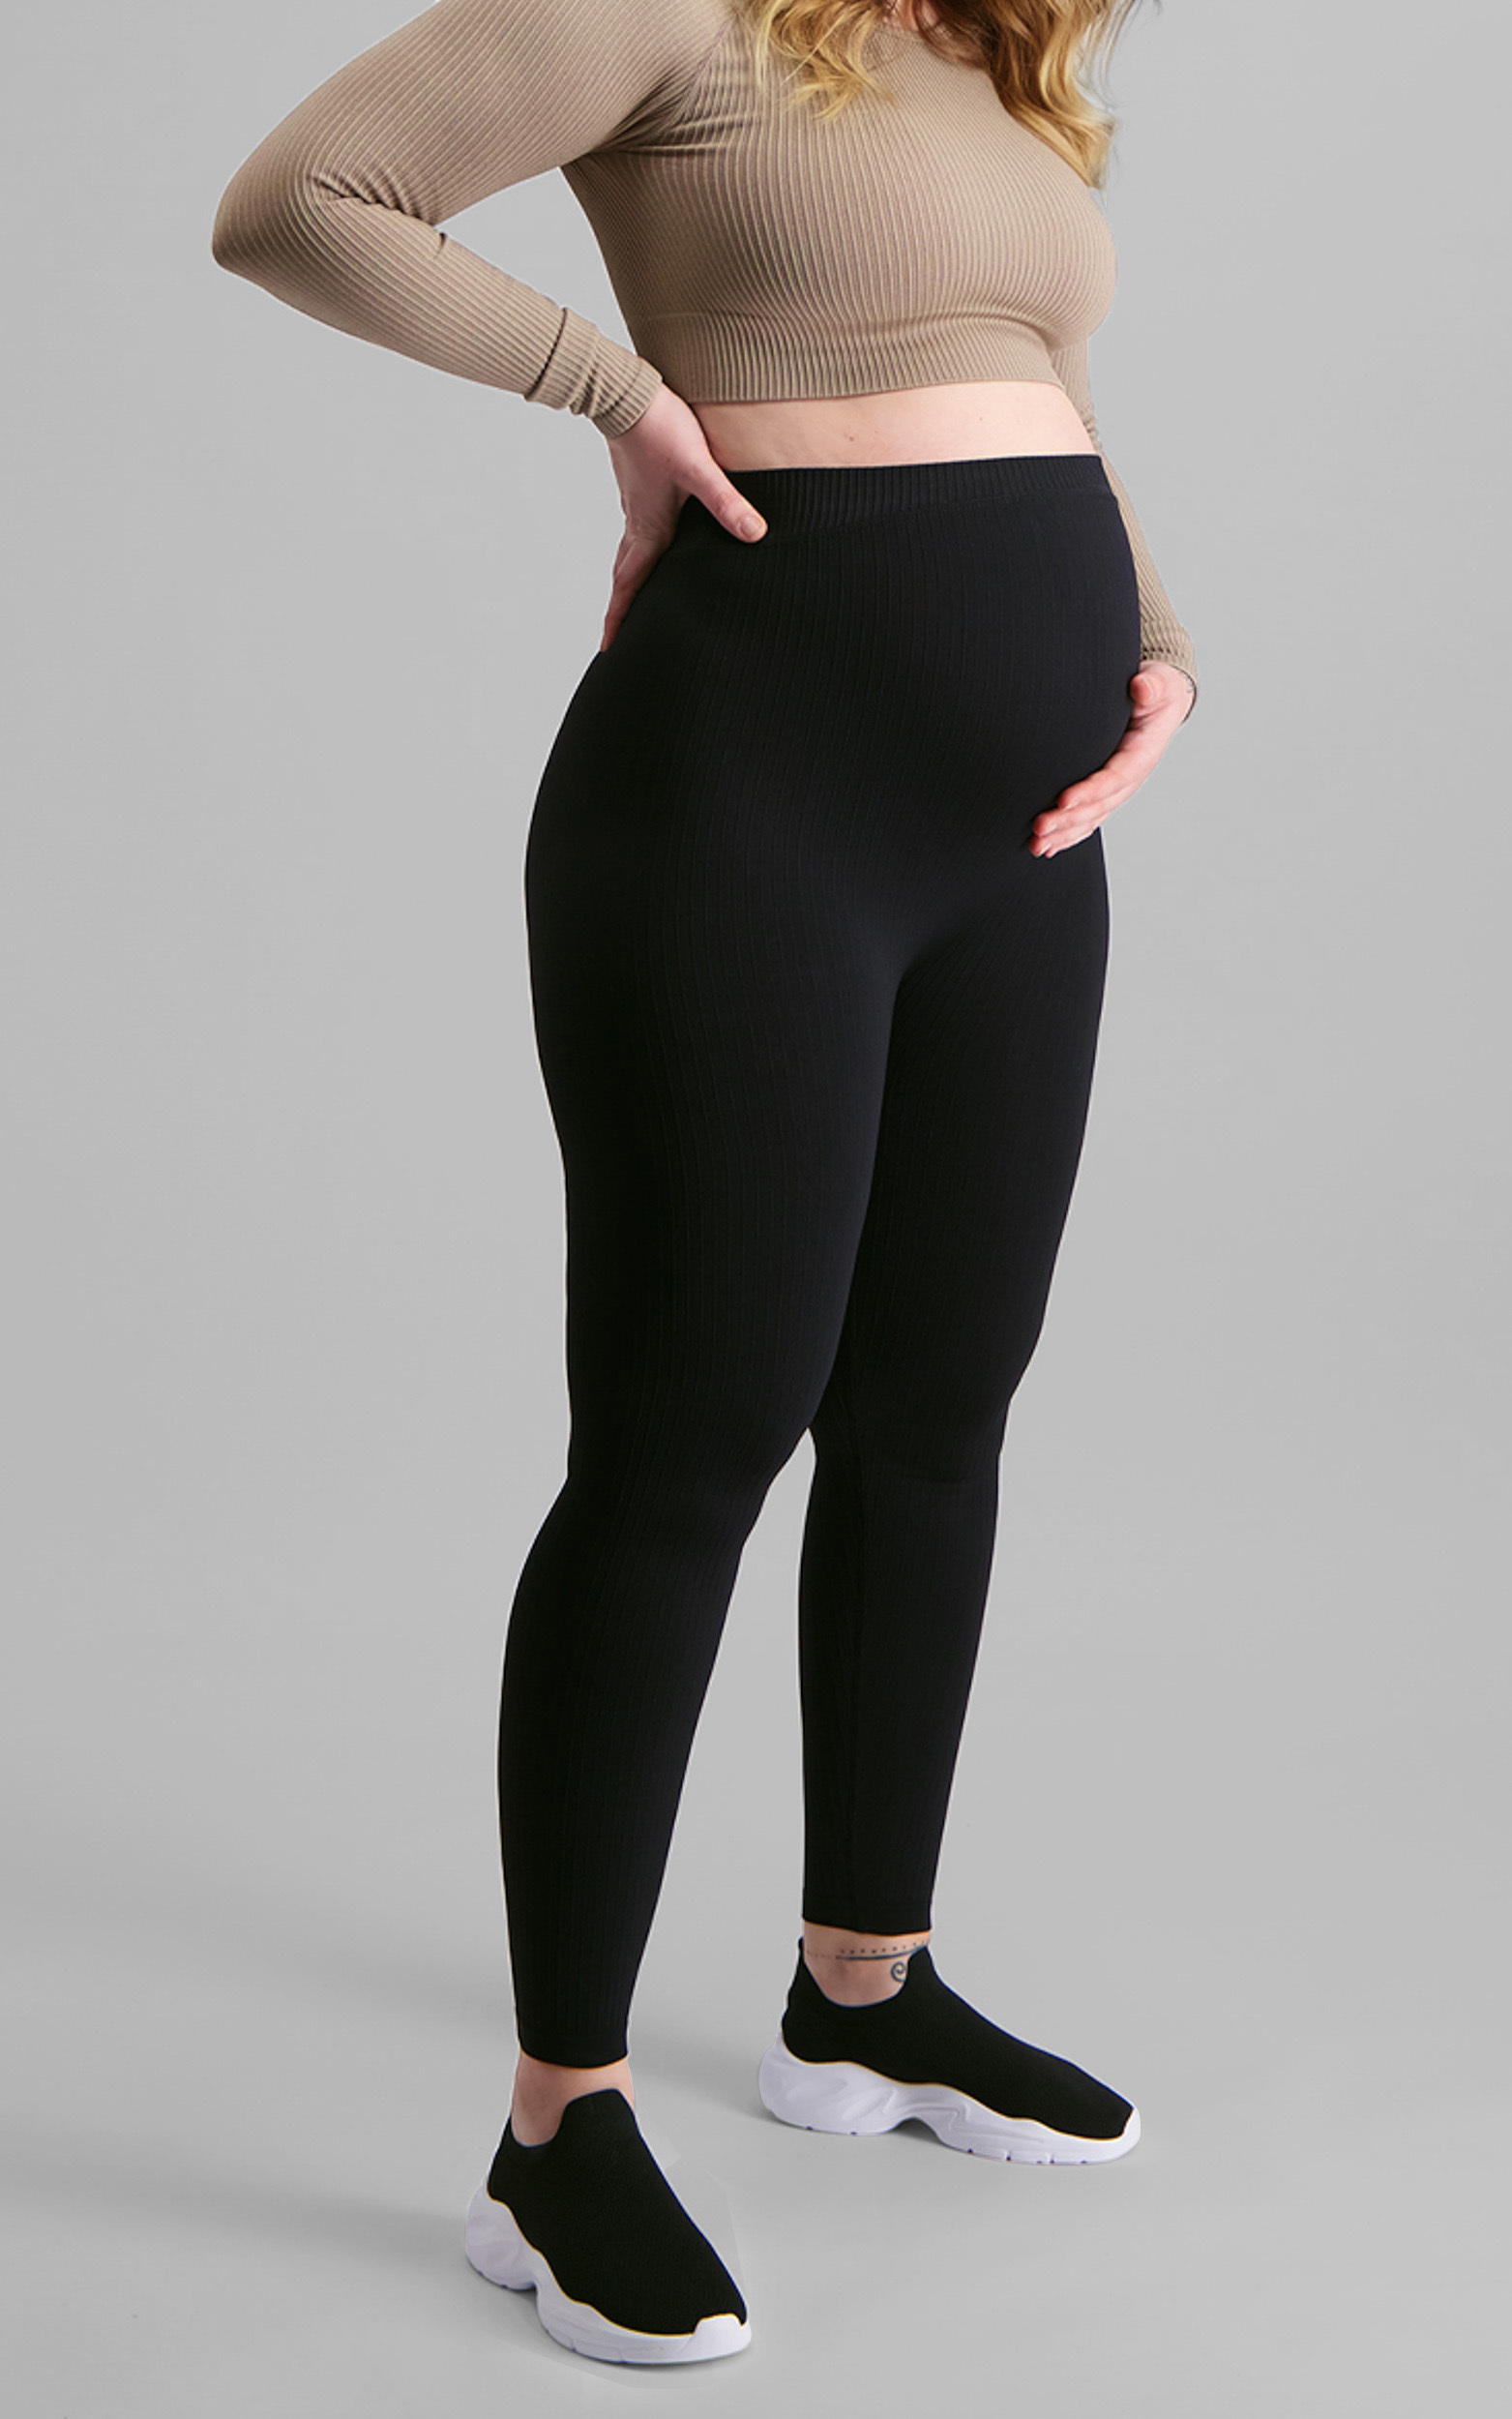 Aim'n - MATERNITY RIBBED SEAMLESS TIGHTS in Black - XS, BLK1, hi-res image number null